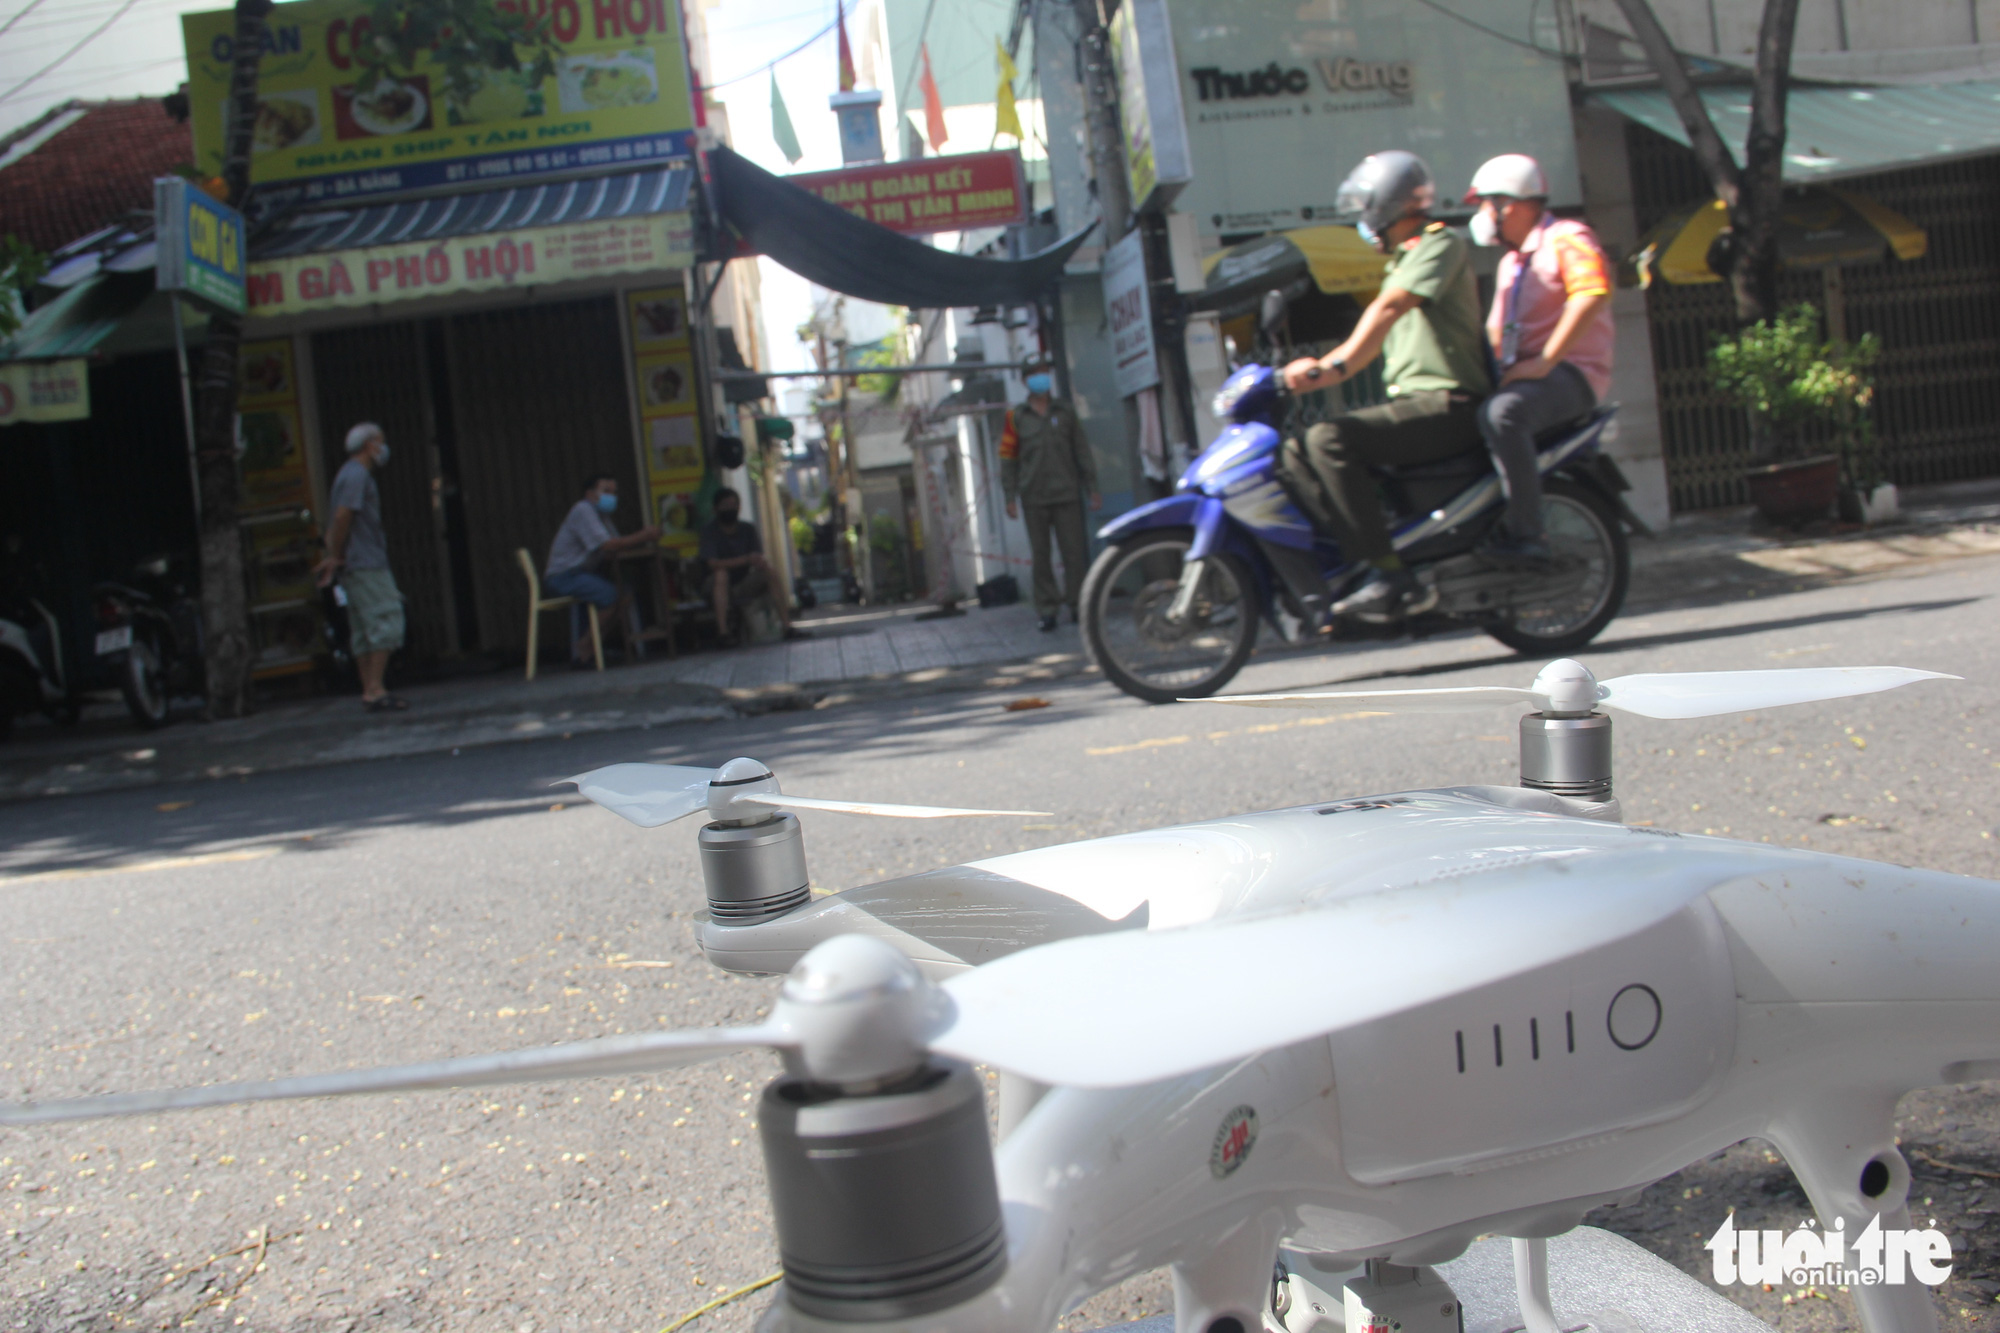 A camera drone is pictured in front of an alley in Hai Chau District, Da Nang, August 29, 2021. Photo: Tuoi Tre